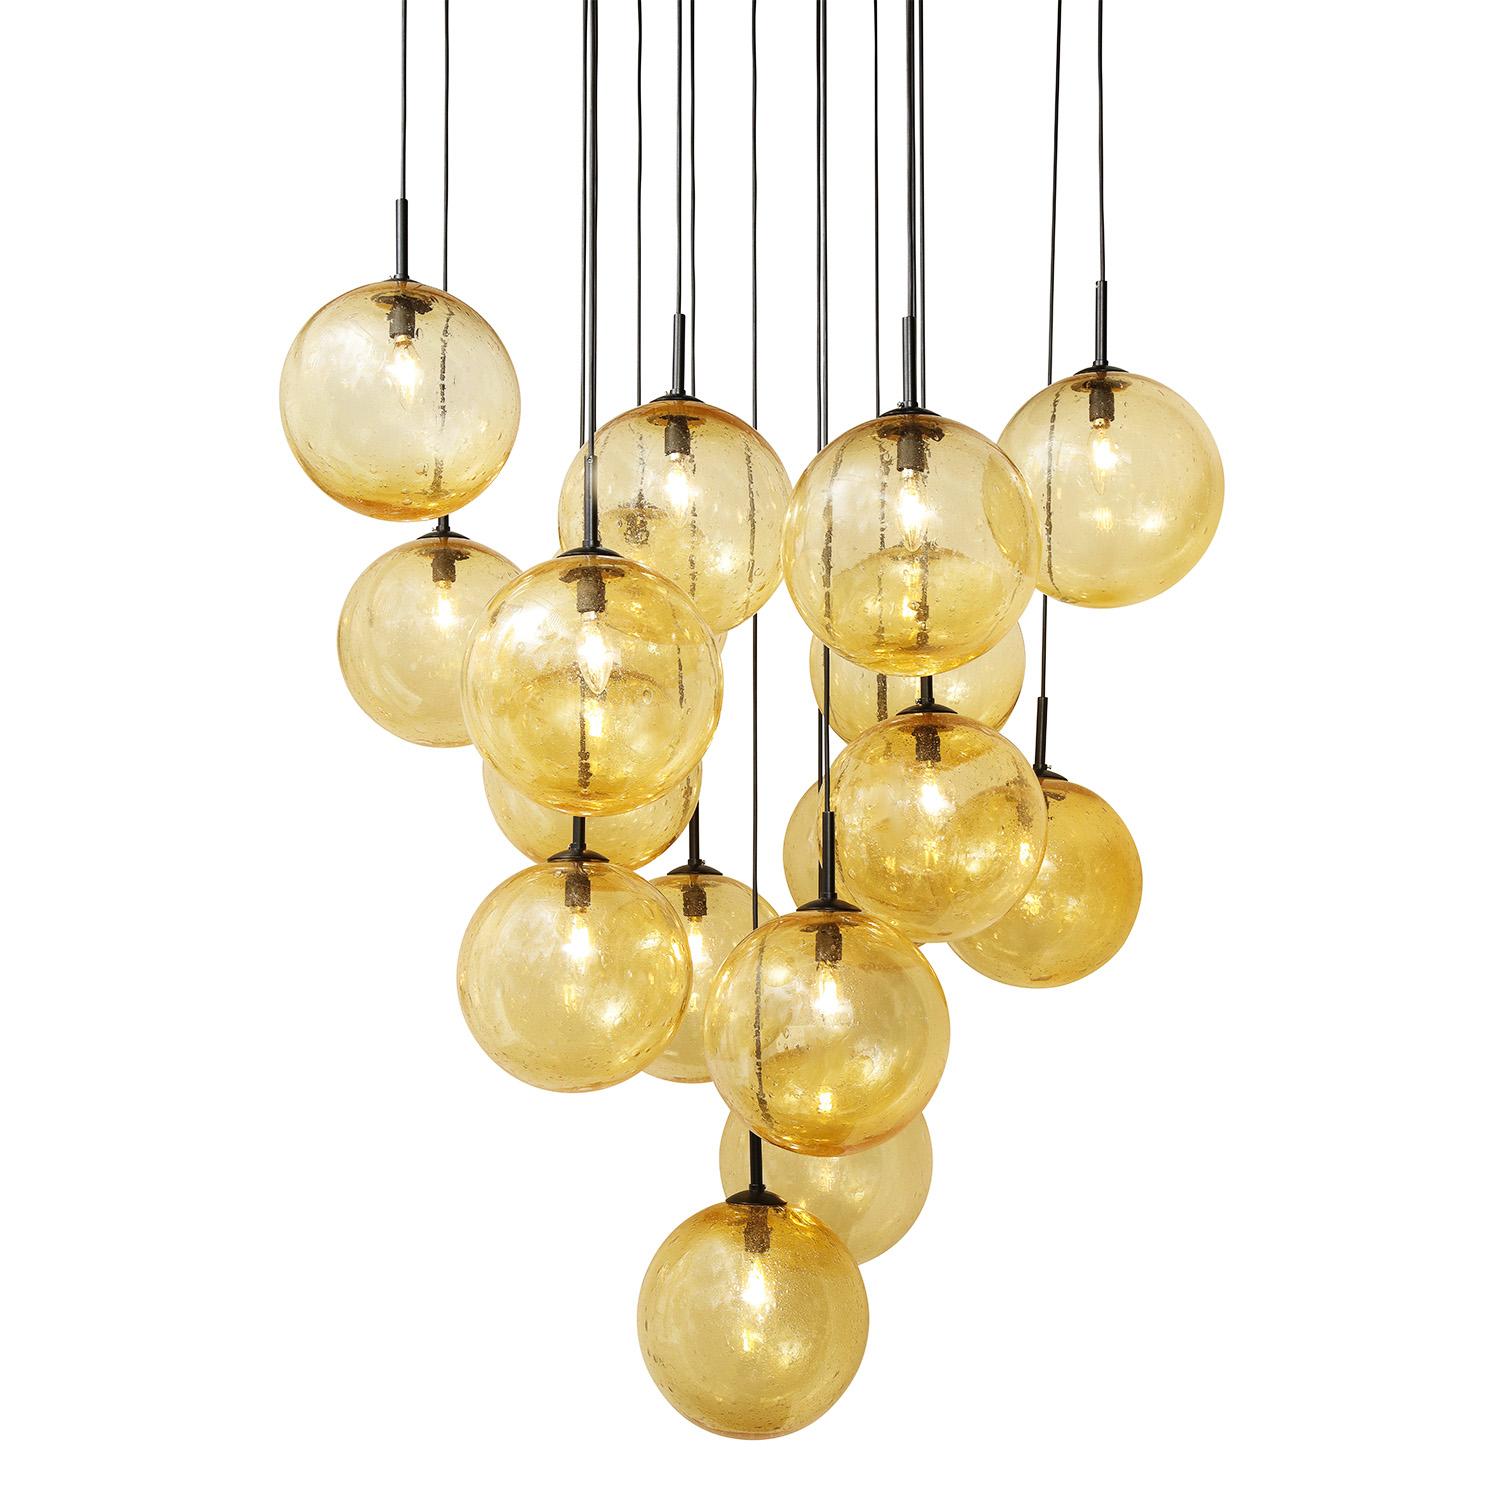 Hand-crafted amber, seeded glass globe chandelier with 16 pendants and blackened steel canopy. 



Customization of dimensions, finish and glass color available.

 